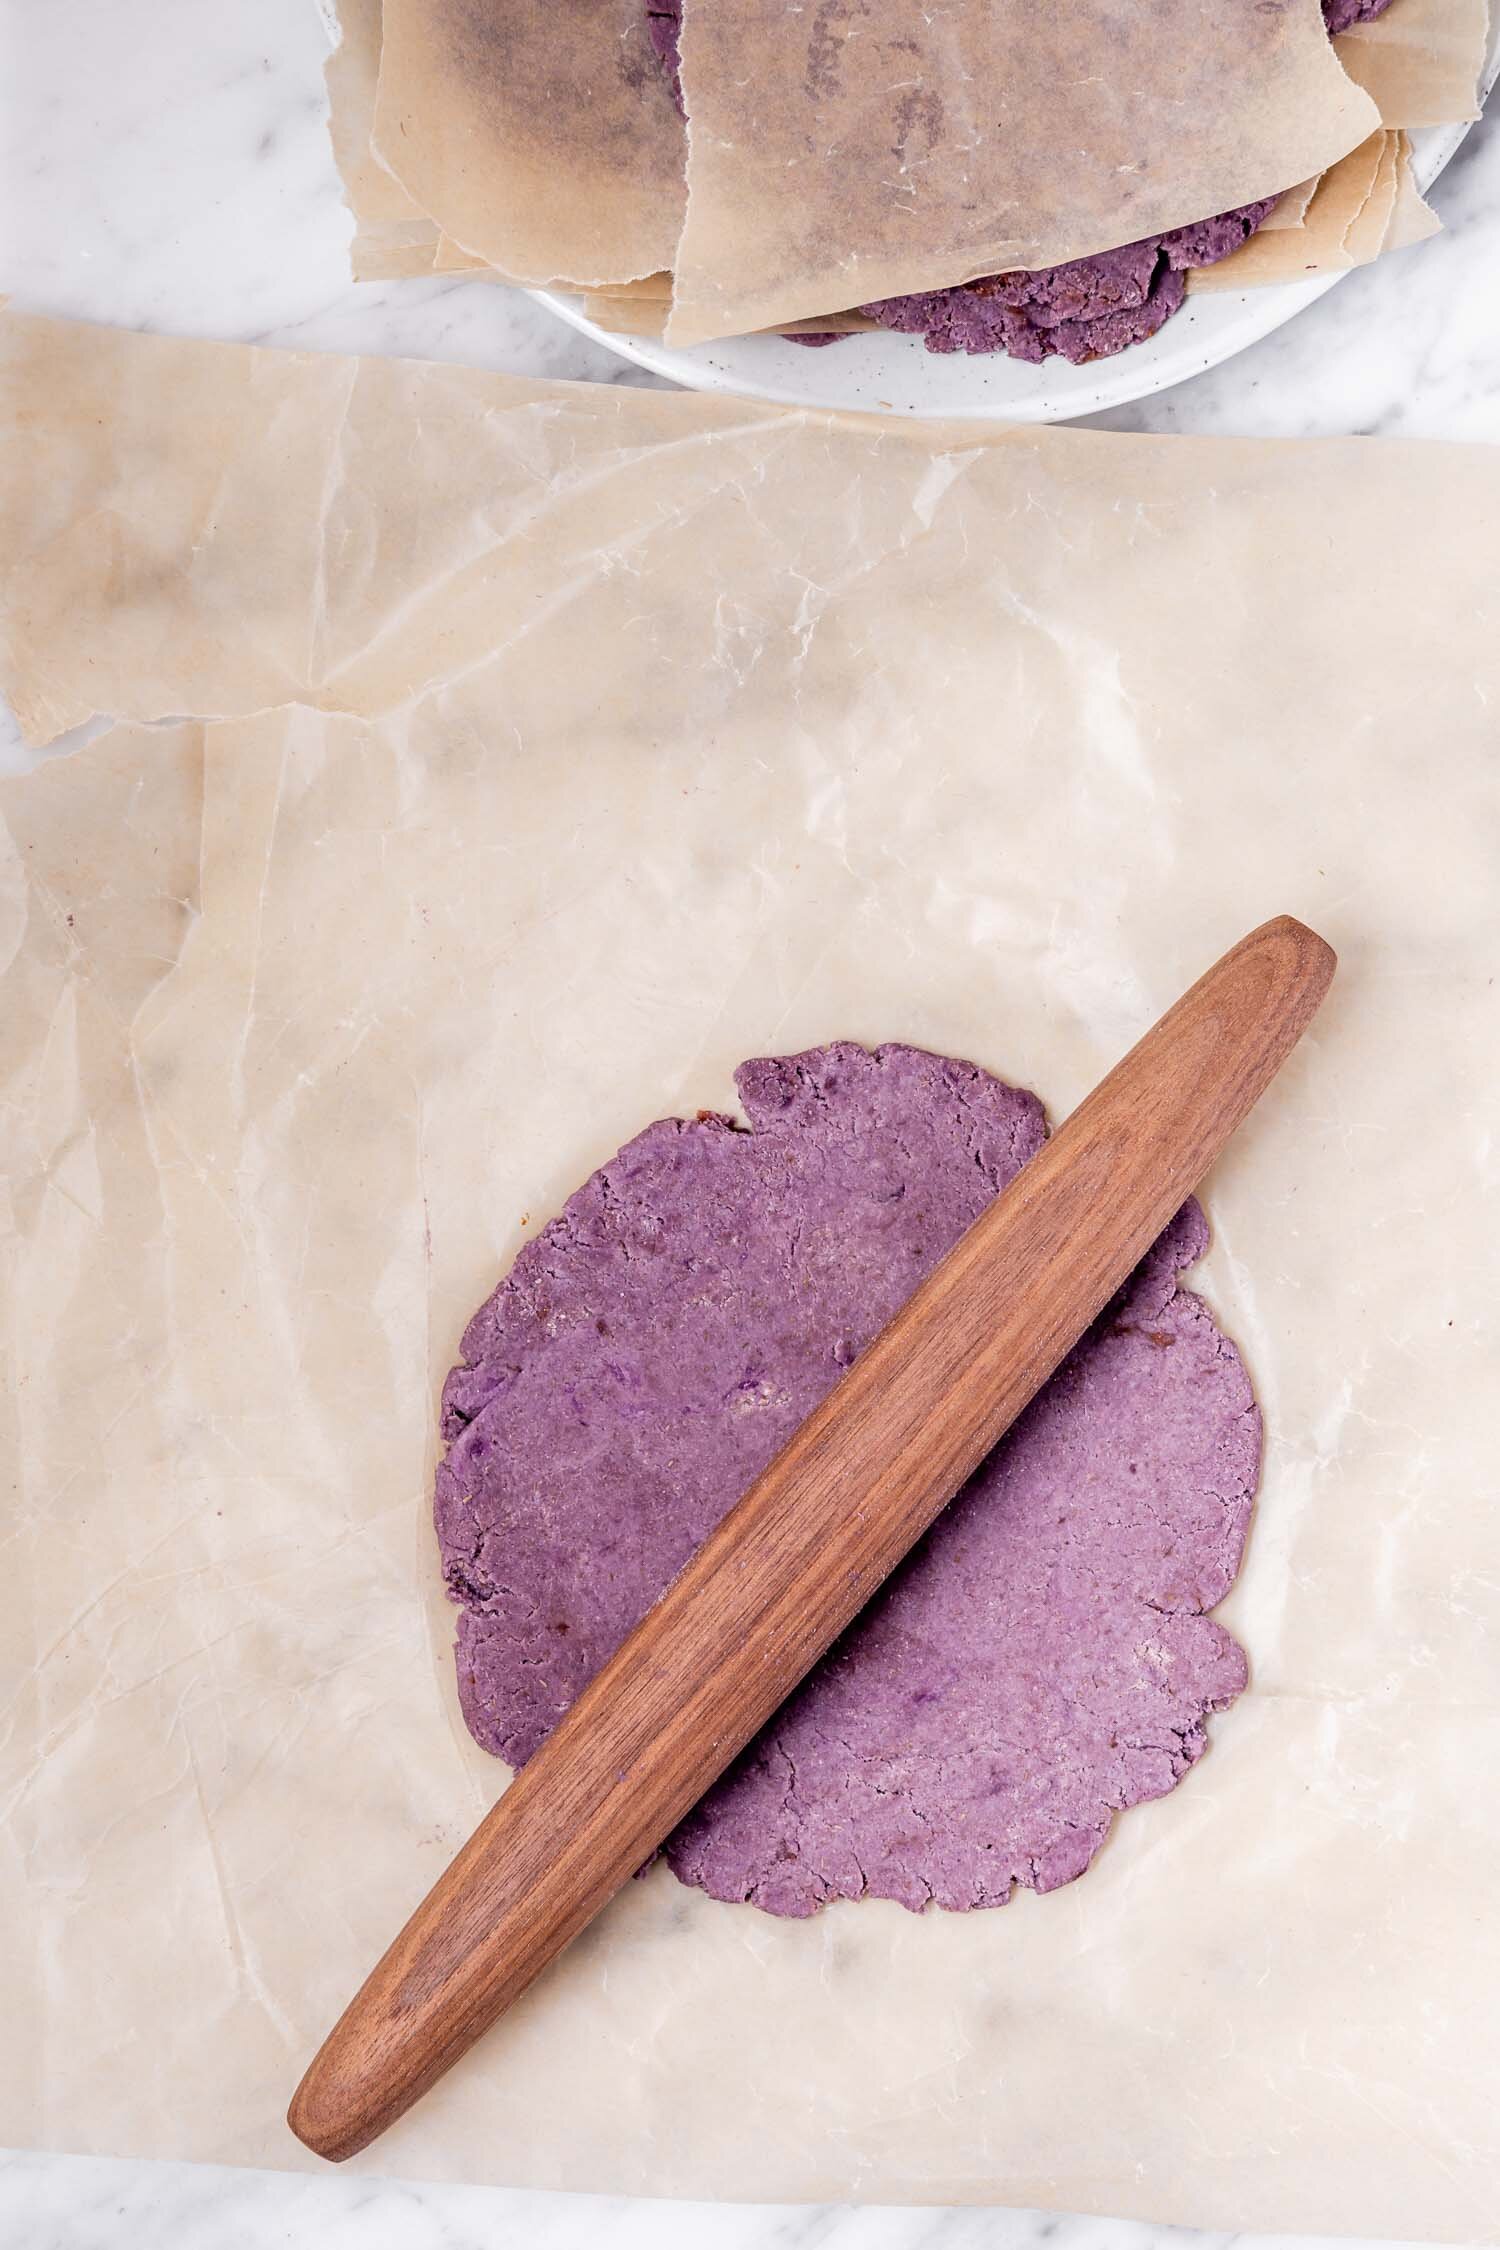 These Easy Potato Flatbreads only require two pantry staple ingredients and make great wraps, tortillas, naan, and pizza crust. By Kari of Beautiful Ingredient. #flatbread #homemade #potato #twoingredientrecipe #easyrecipe #vegan #glutenfree #nutfree #yeastfree #tortilla #purple #pizzacrust #naan #quickbread